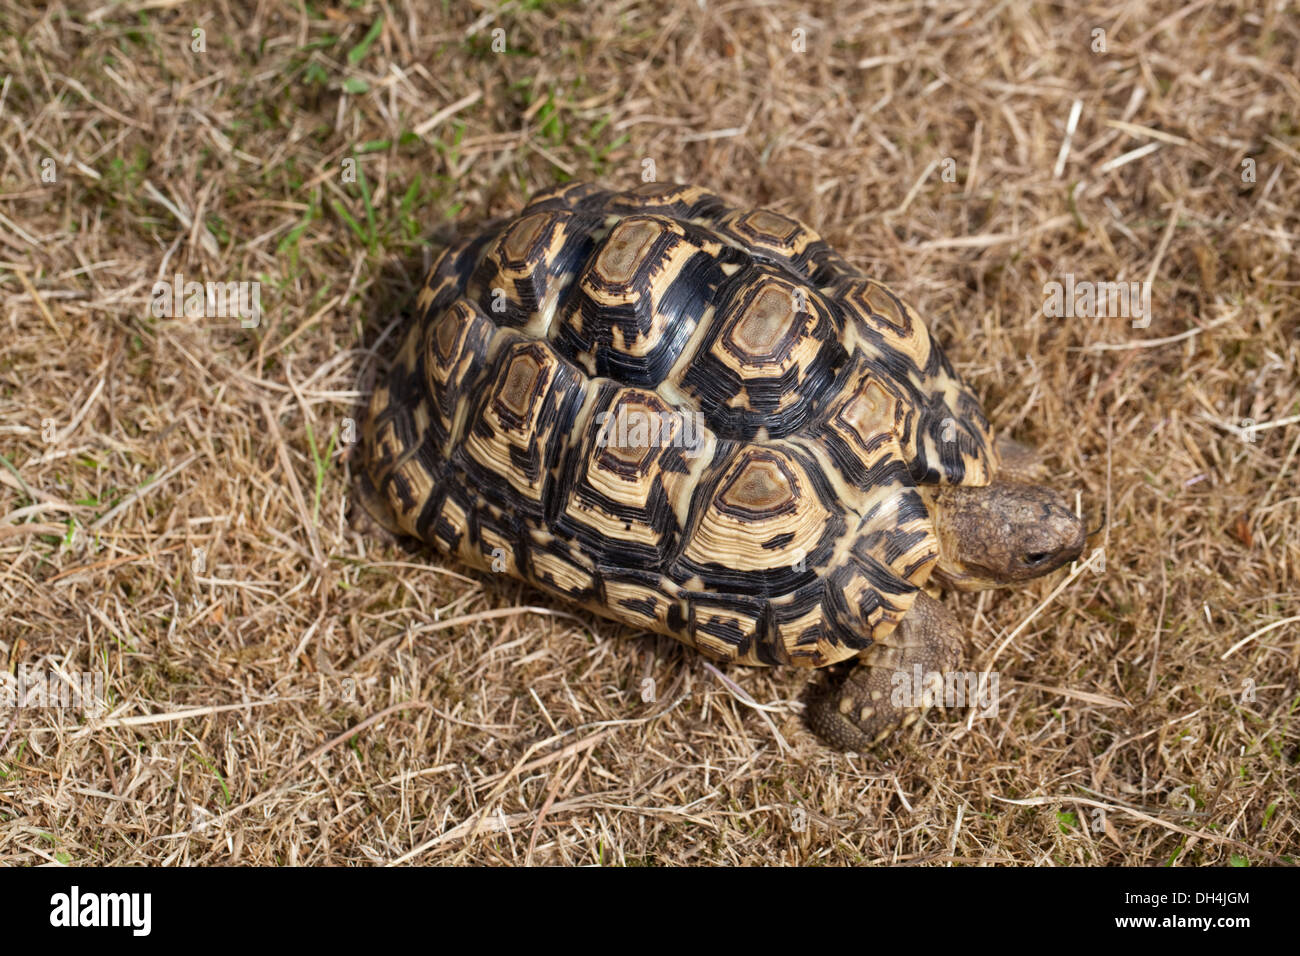 Leopard Tortoise (Geochelone pardalis). Illustrating how cryptic carapace markings help brake up outline against a dry habitat. Stock Photo